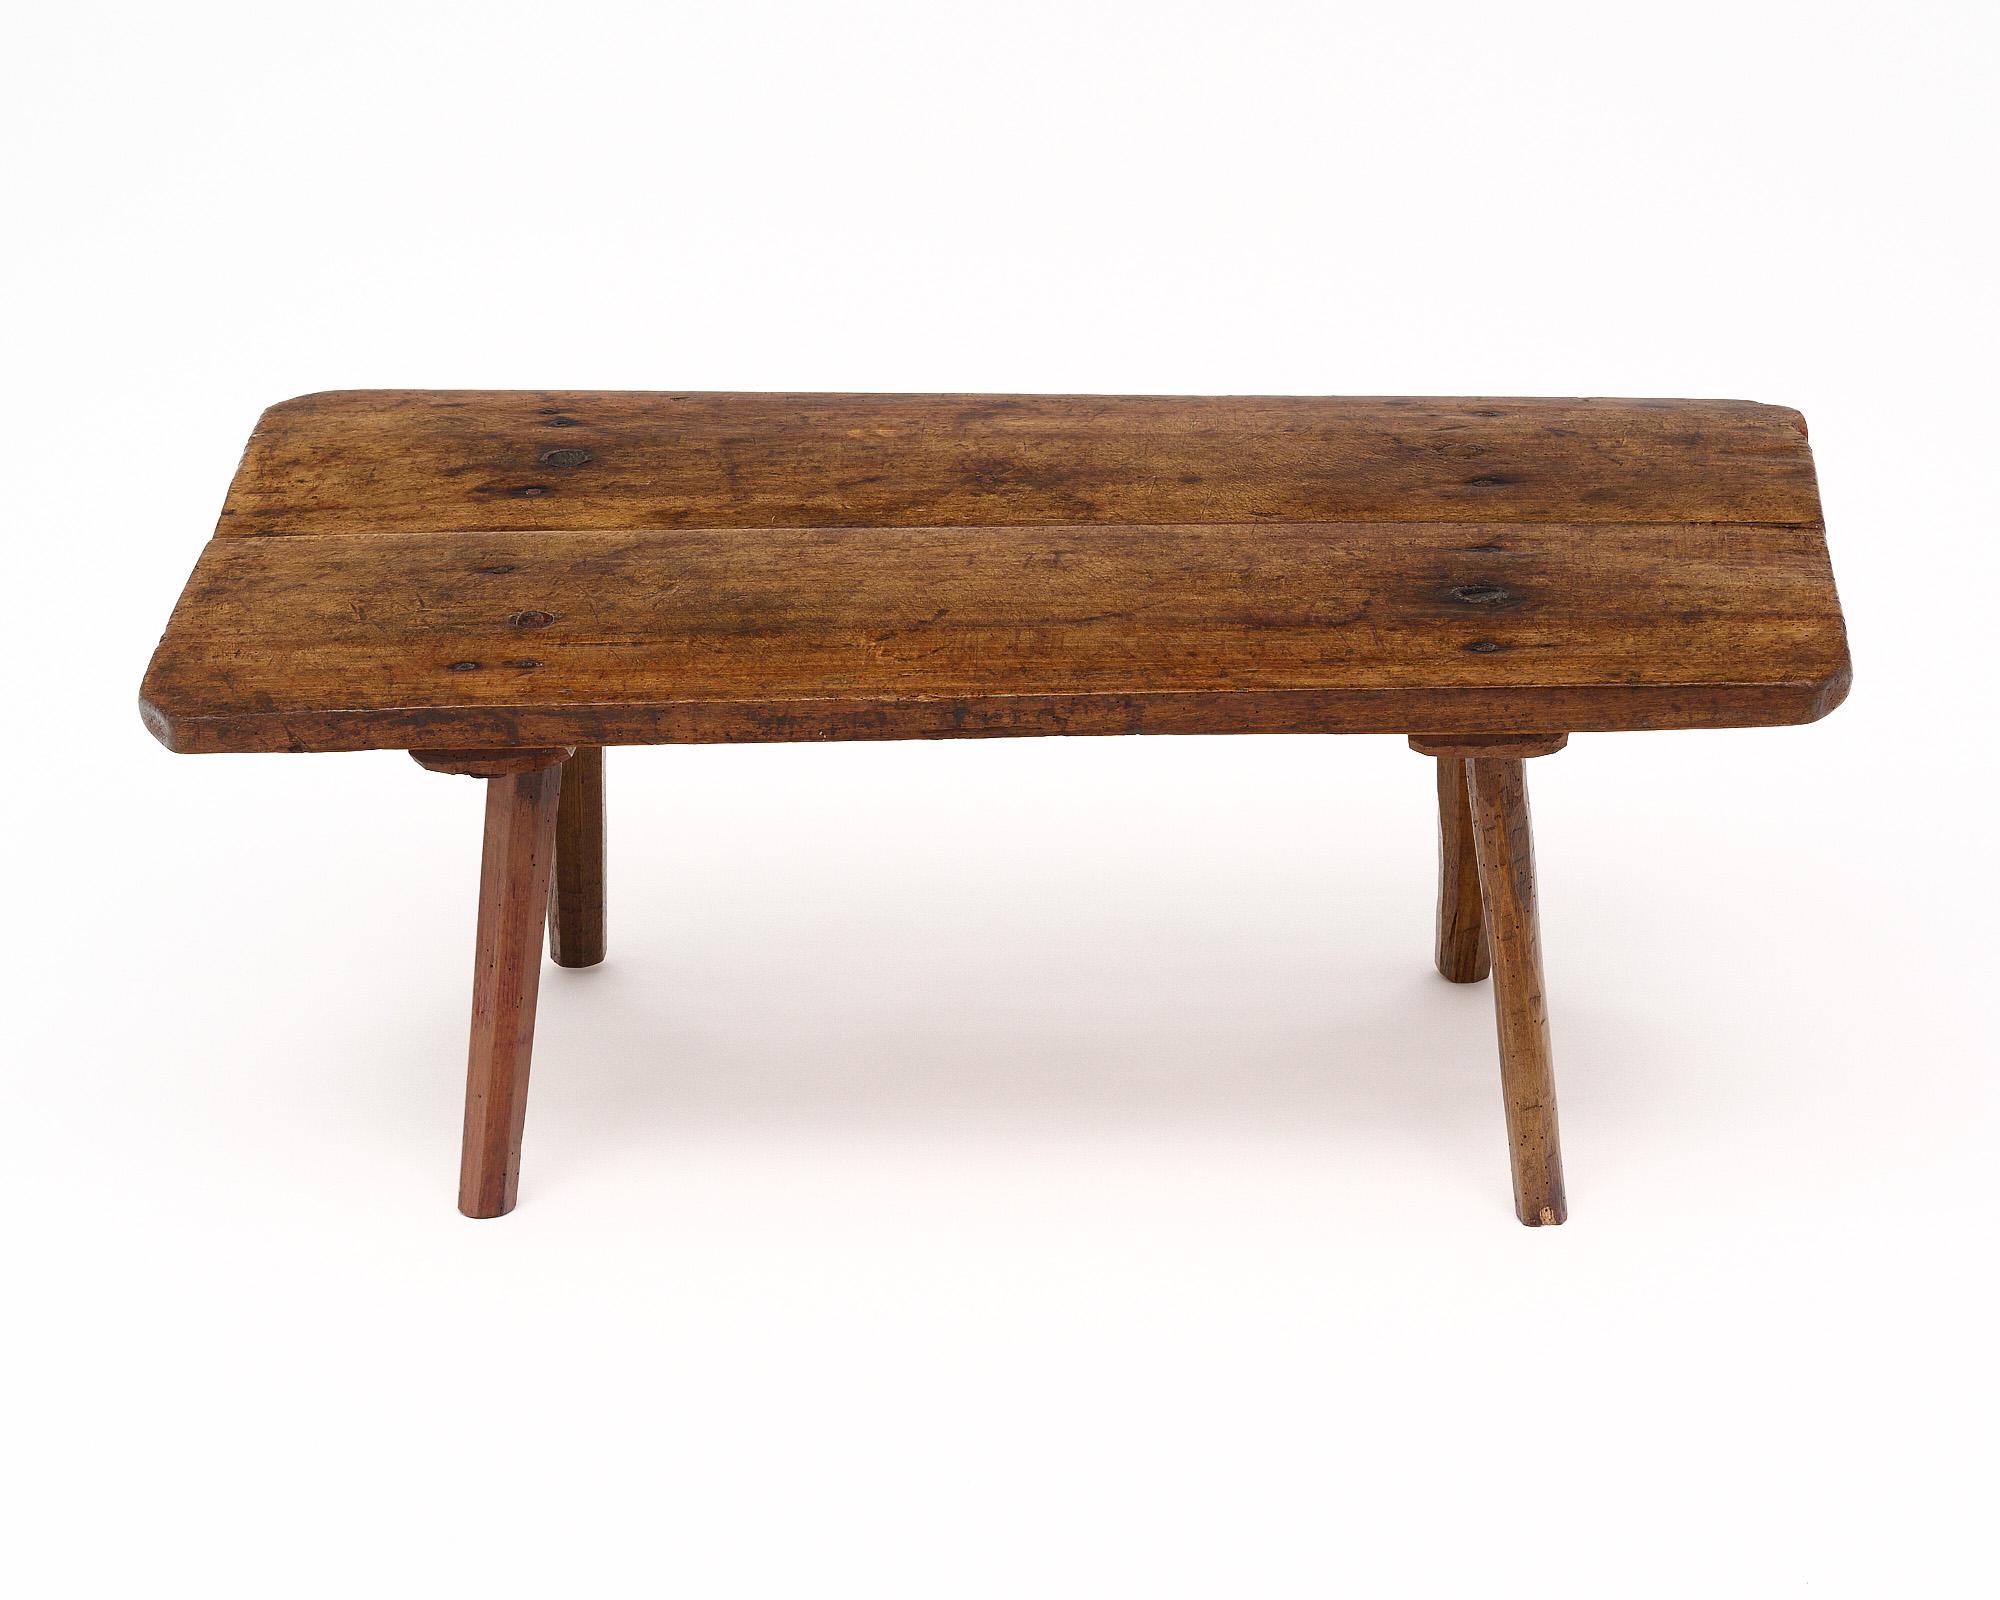 Shepherd table from the Dolomites in Italy. Original patina to the chestnut wood. This piece has four legs supporting a two-plank top. It is crafted with peg joinery.
